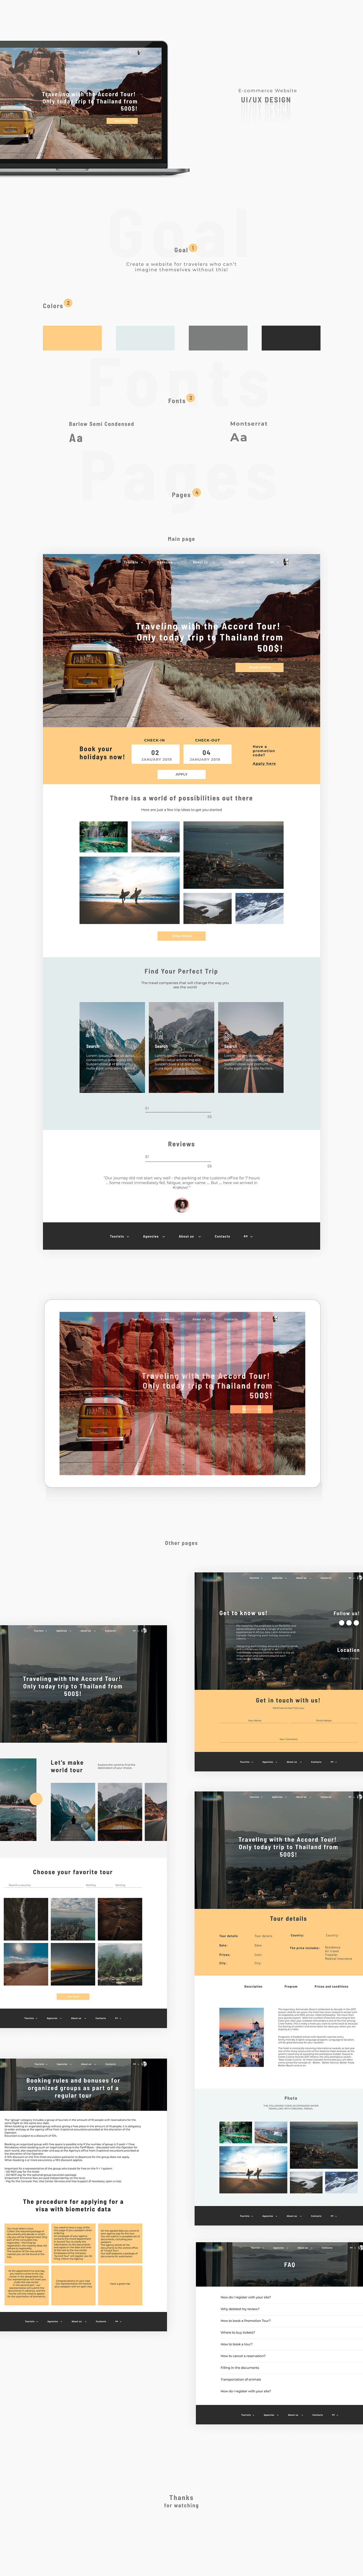 Website Travel UI/UX Interface Project wireframes